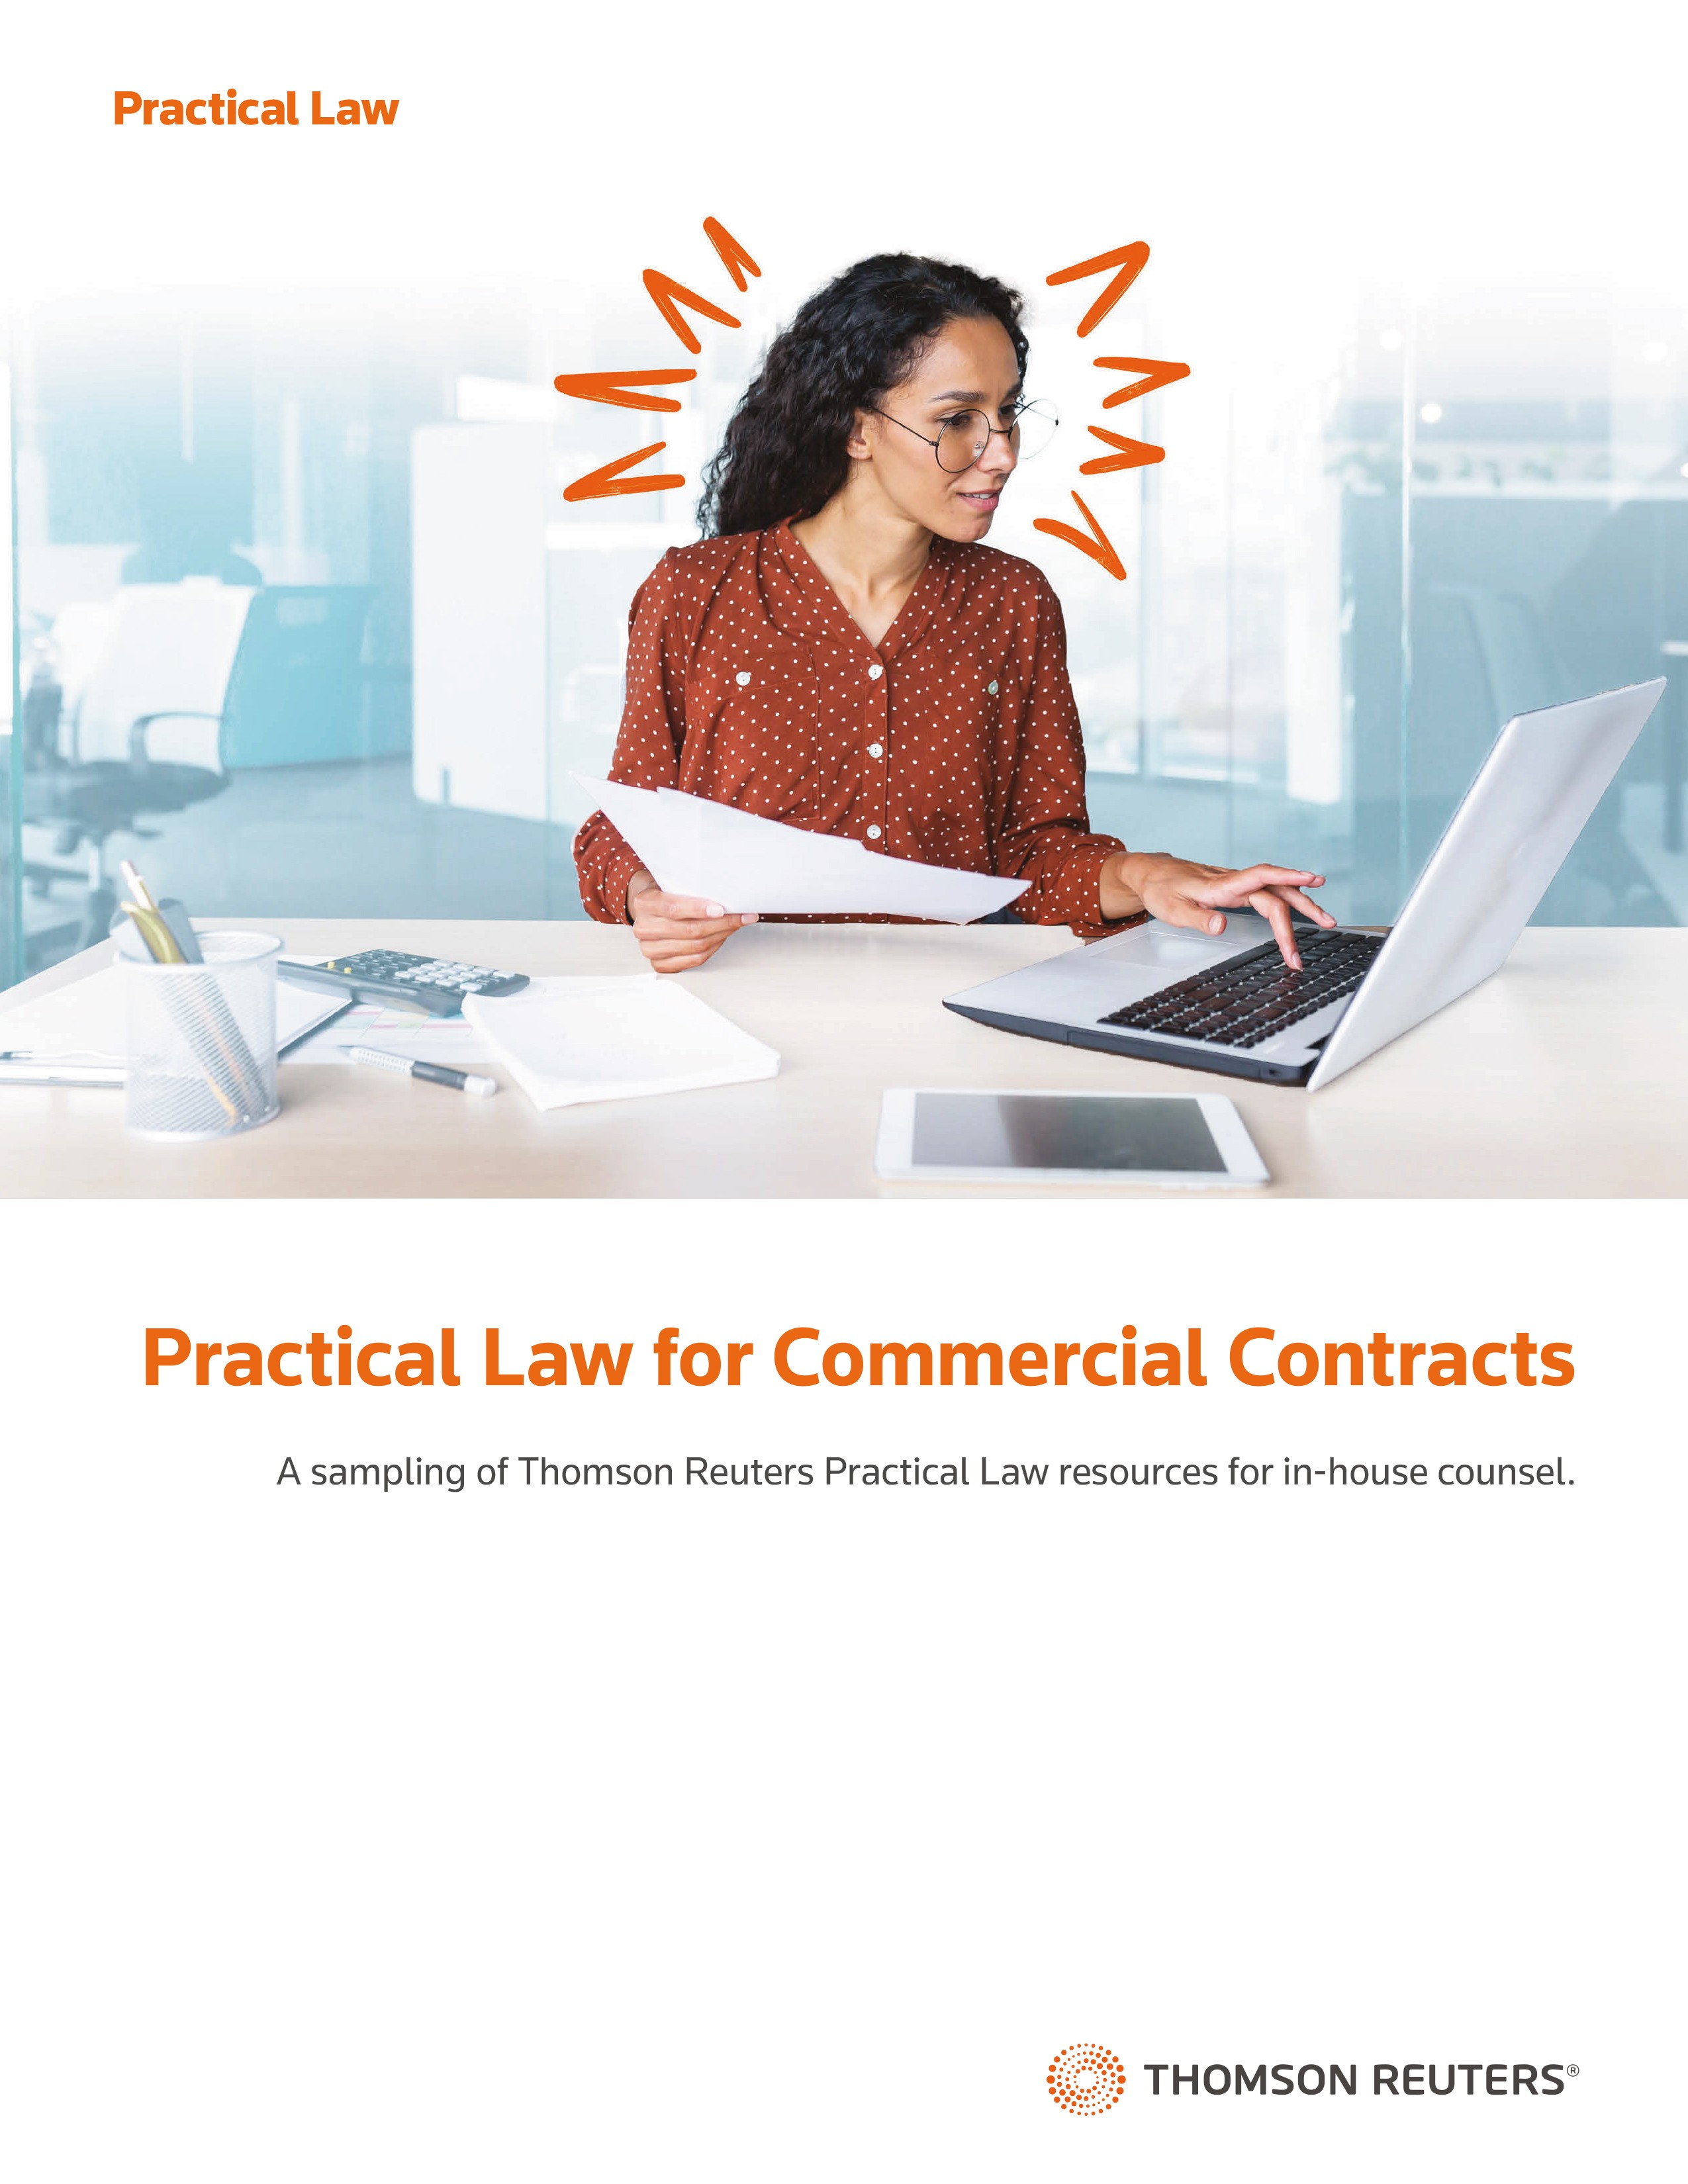 Practical Law contract drafting resources for in-house counsel